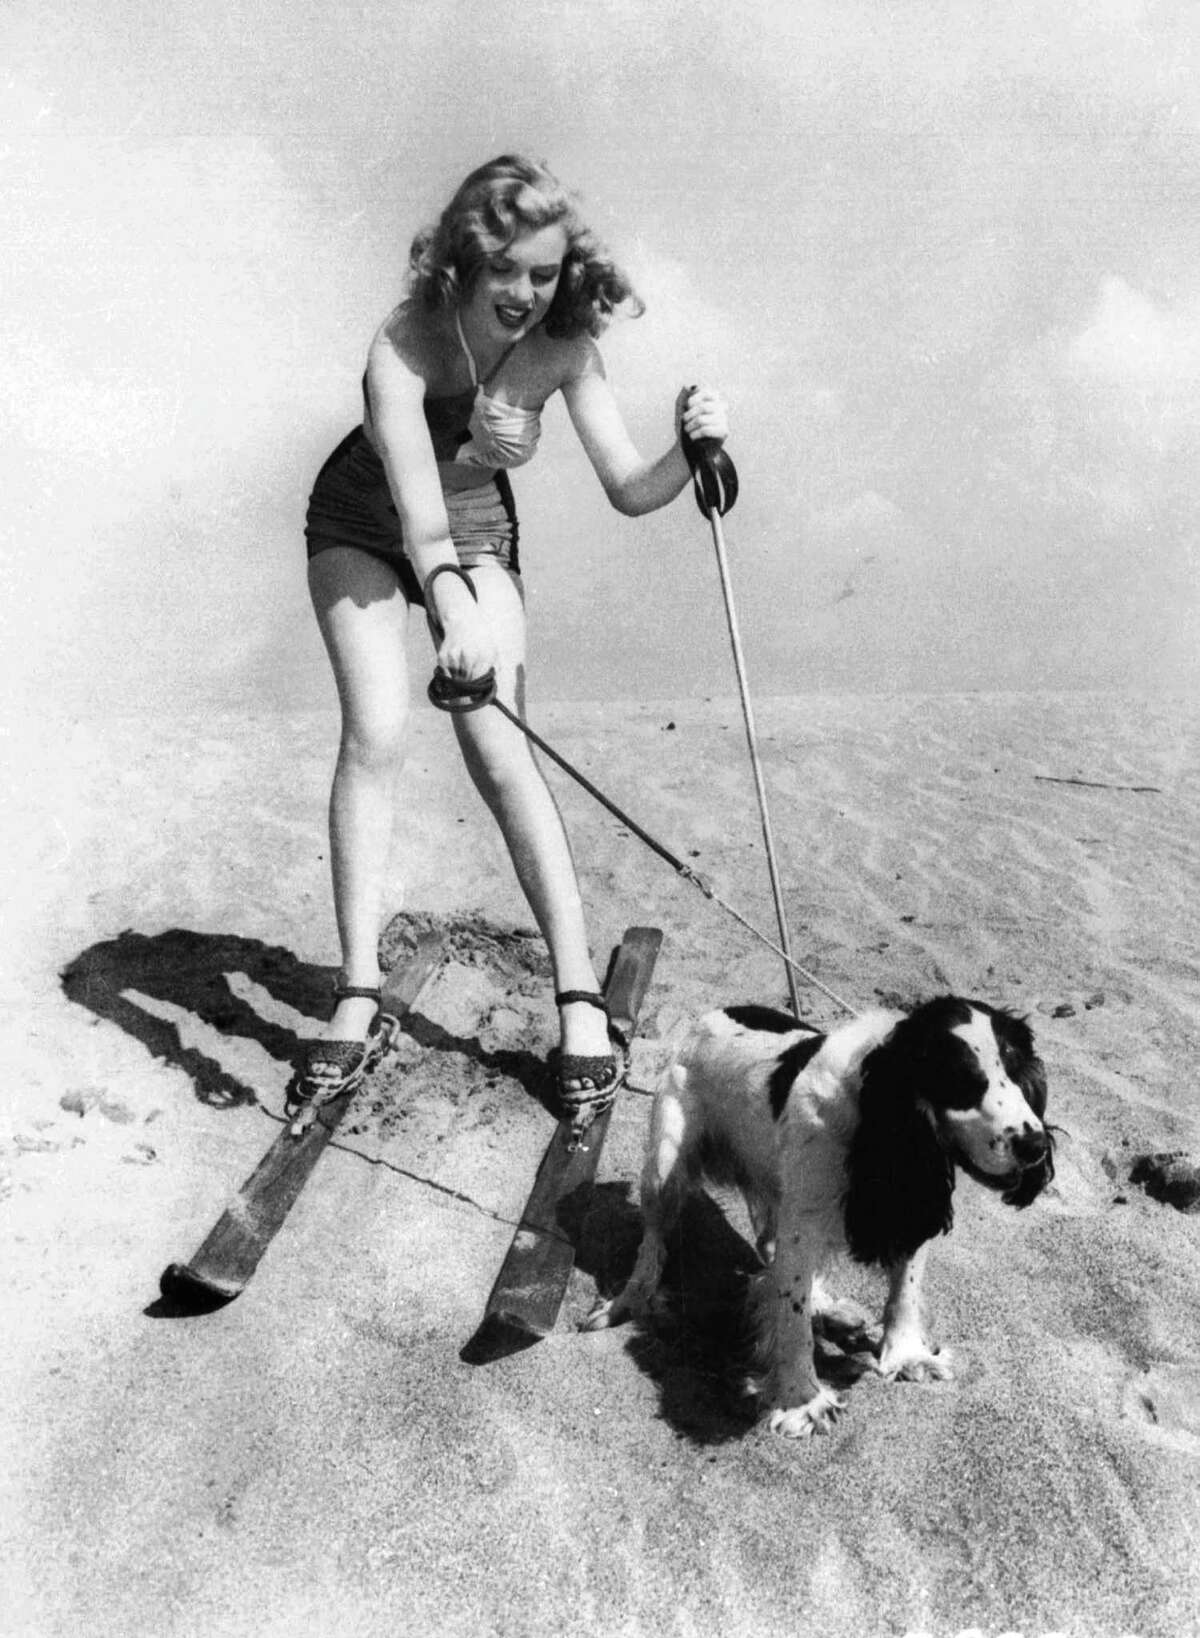 In this January 1, 1947 file photo, starlet Marilyn Monroe plays at the beach with her dog Ruffles.